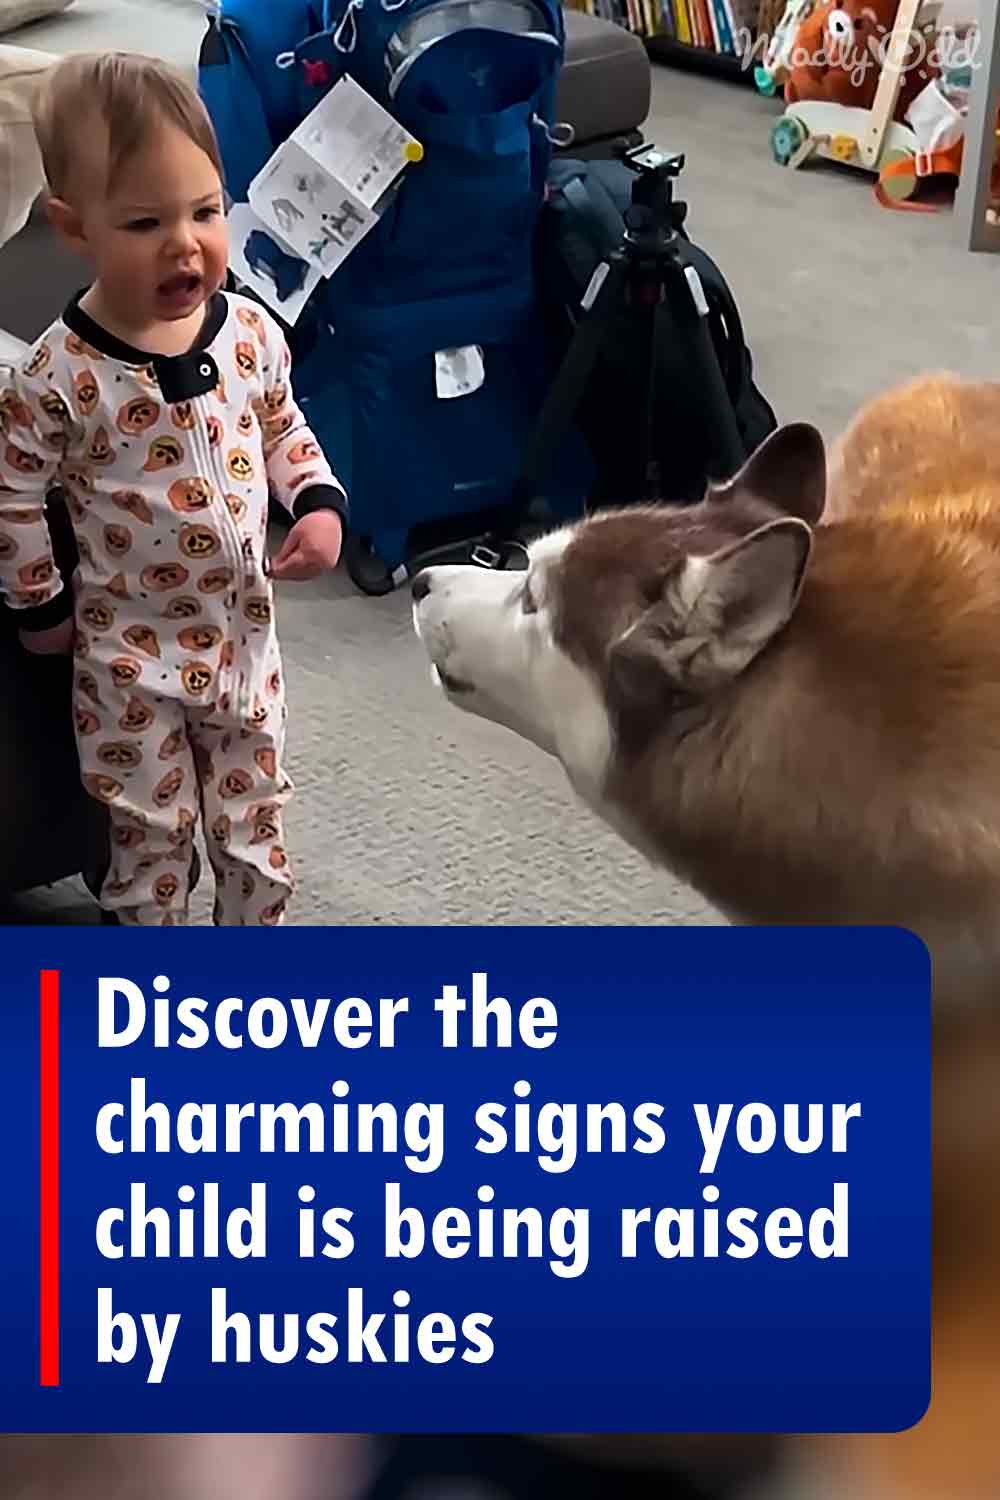 Discover the charming signs your child is being raised by huskies